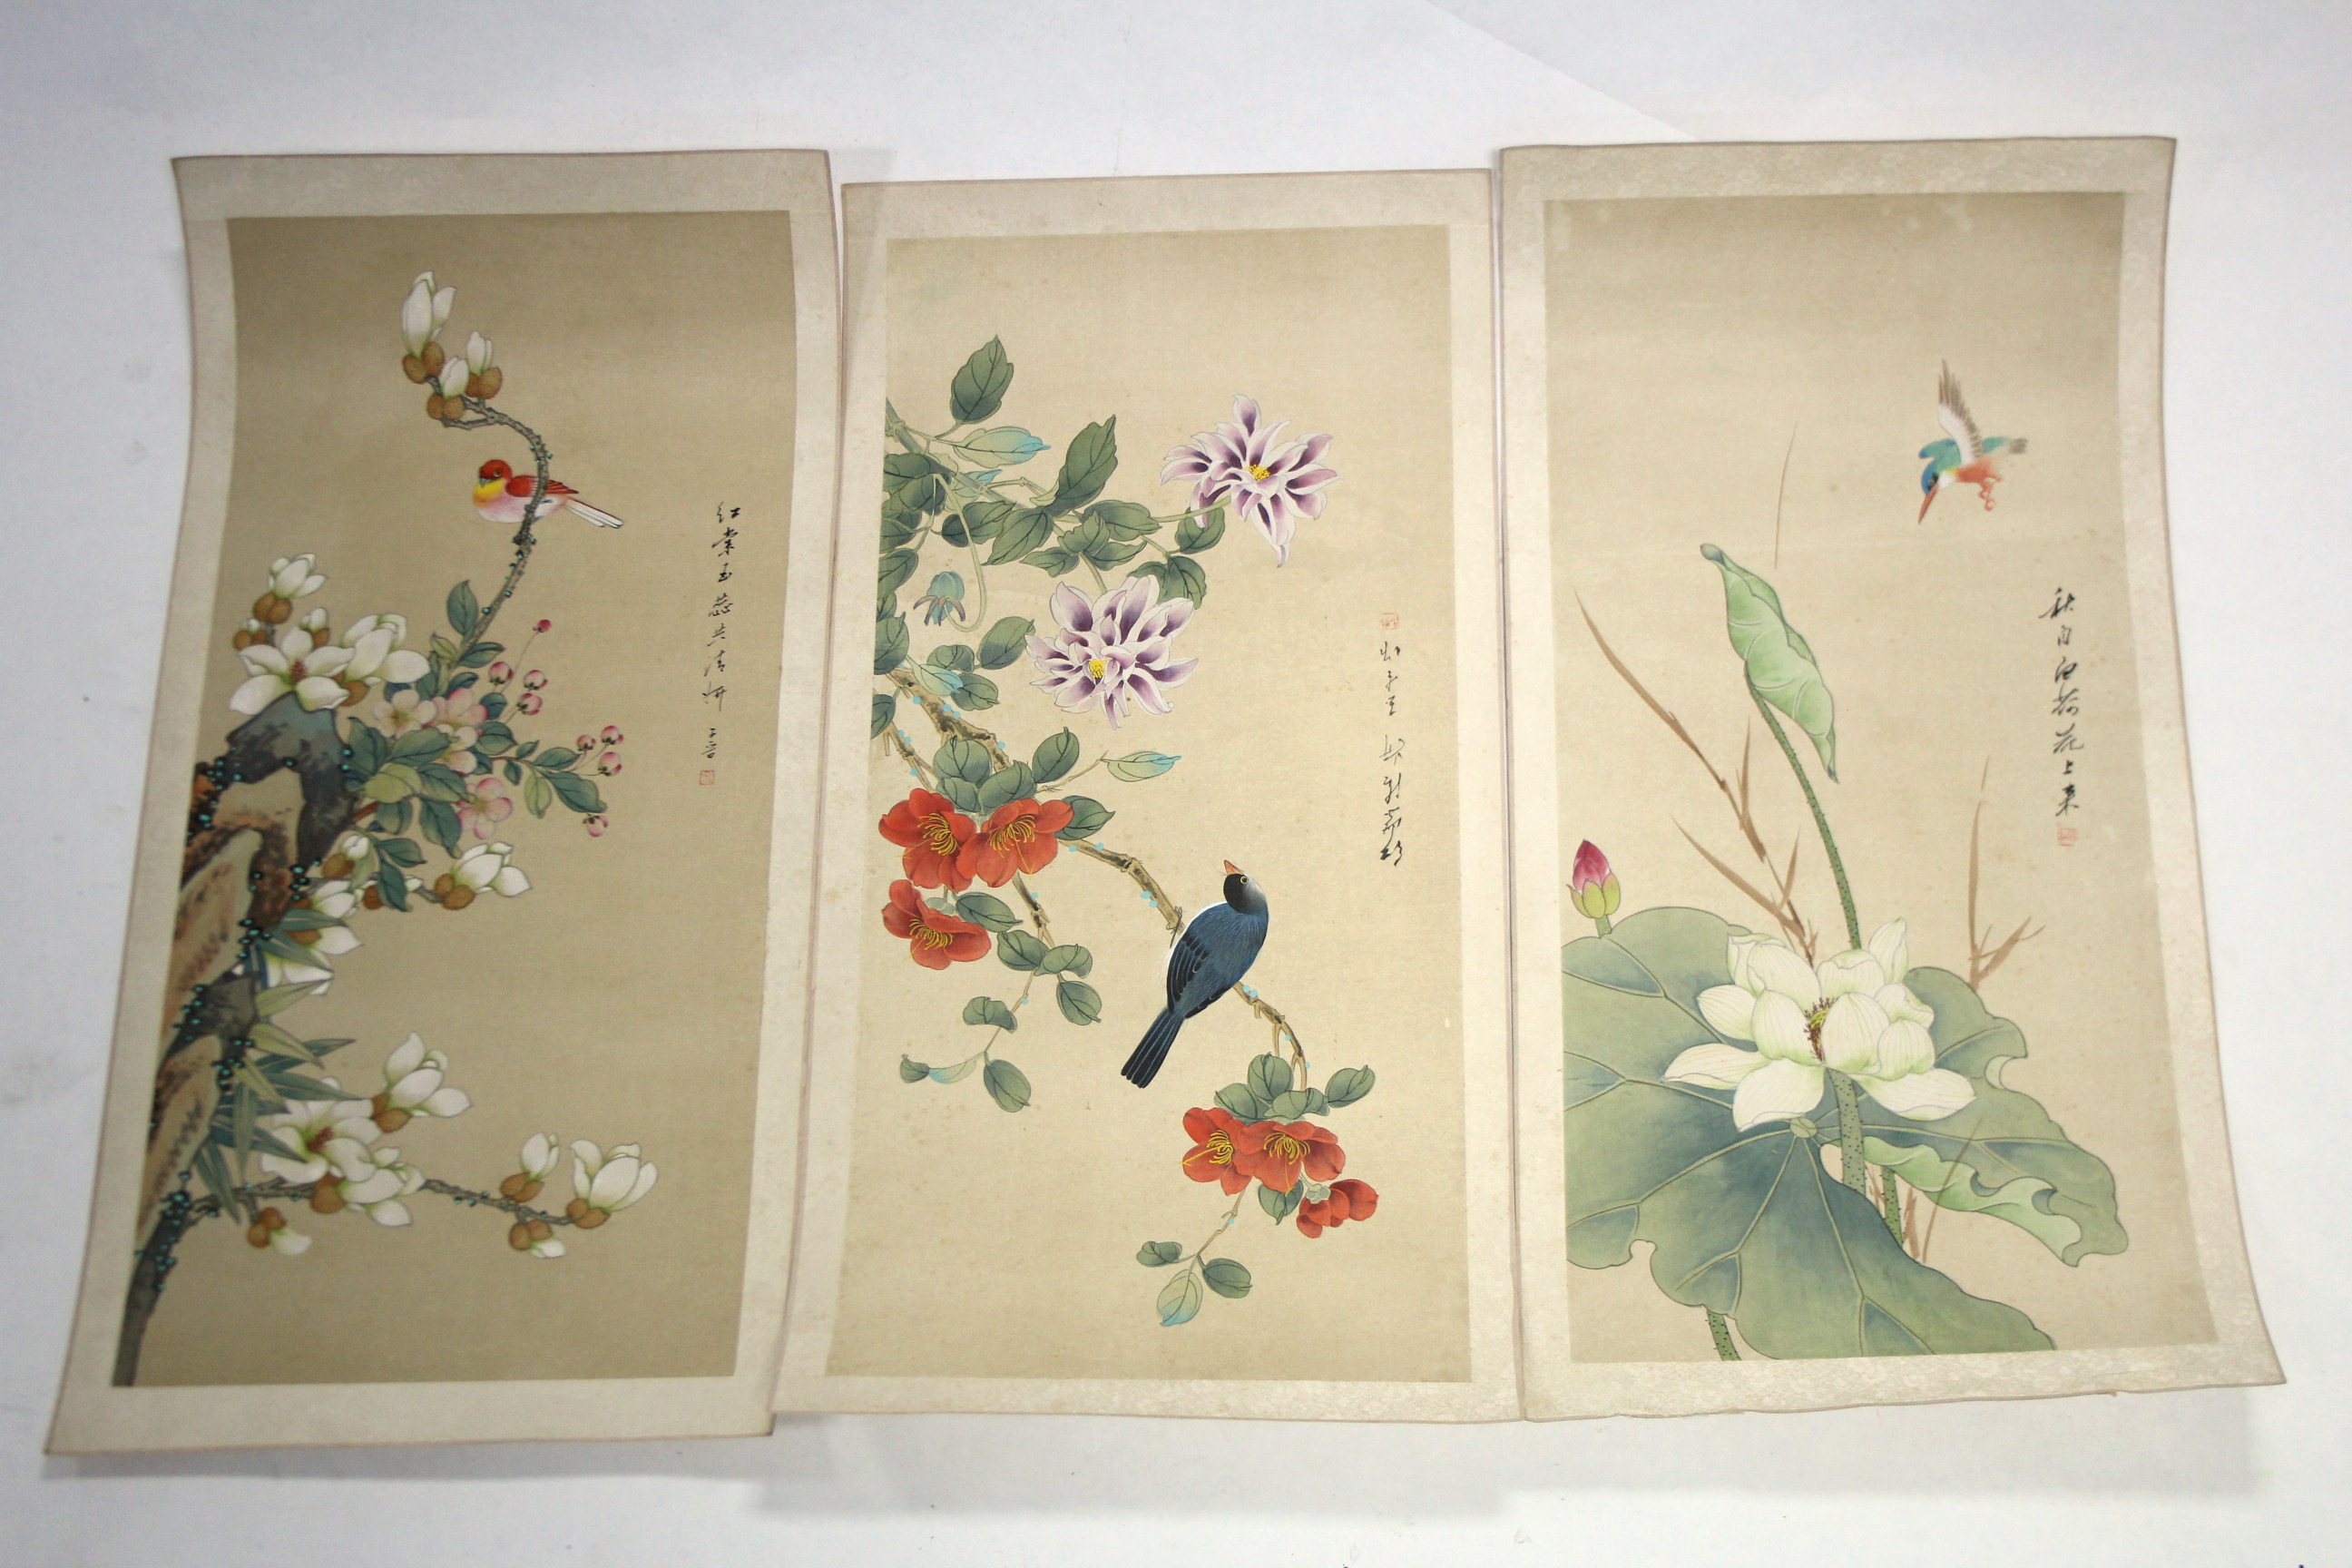 CHINESE SCHOOL A set of six scroll paintings of exotic flowers, birds, & butterflies; 26.5" x 12.5". - Image 2 of 2